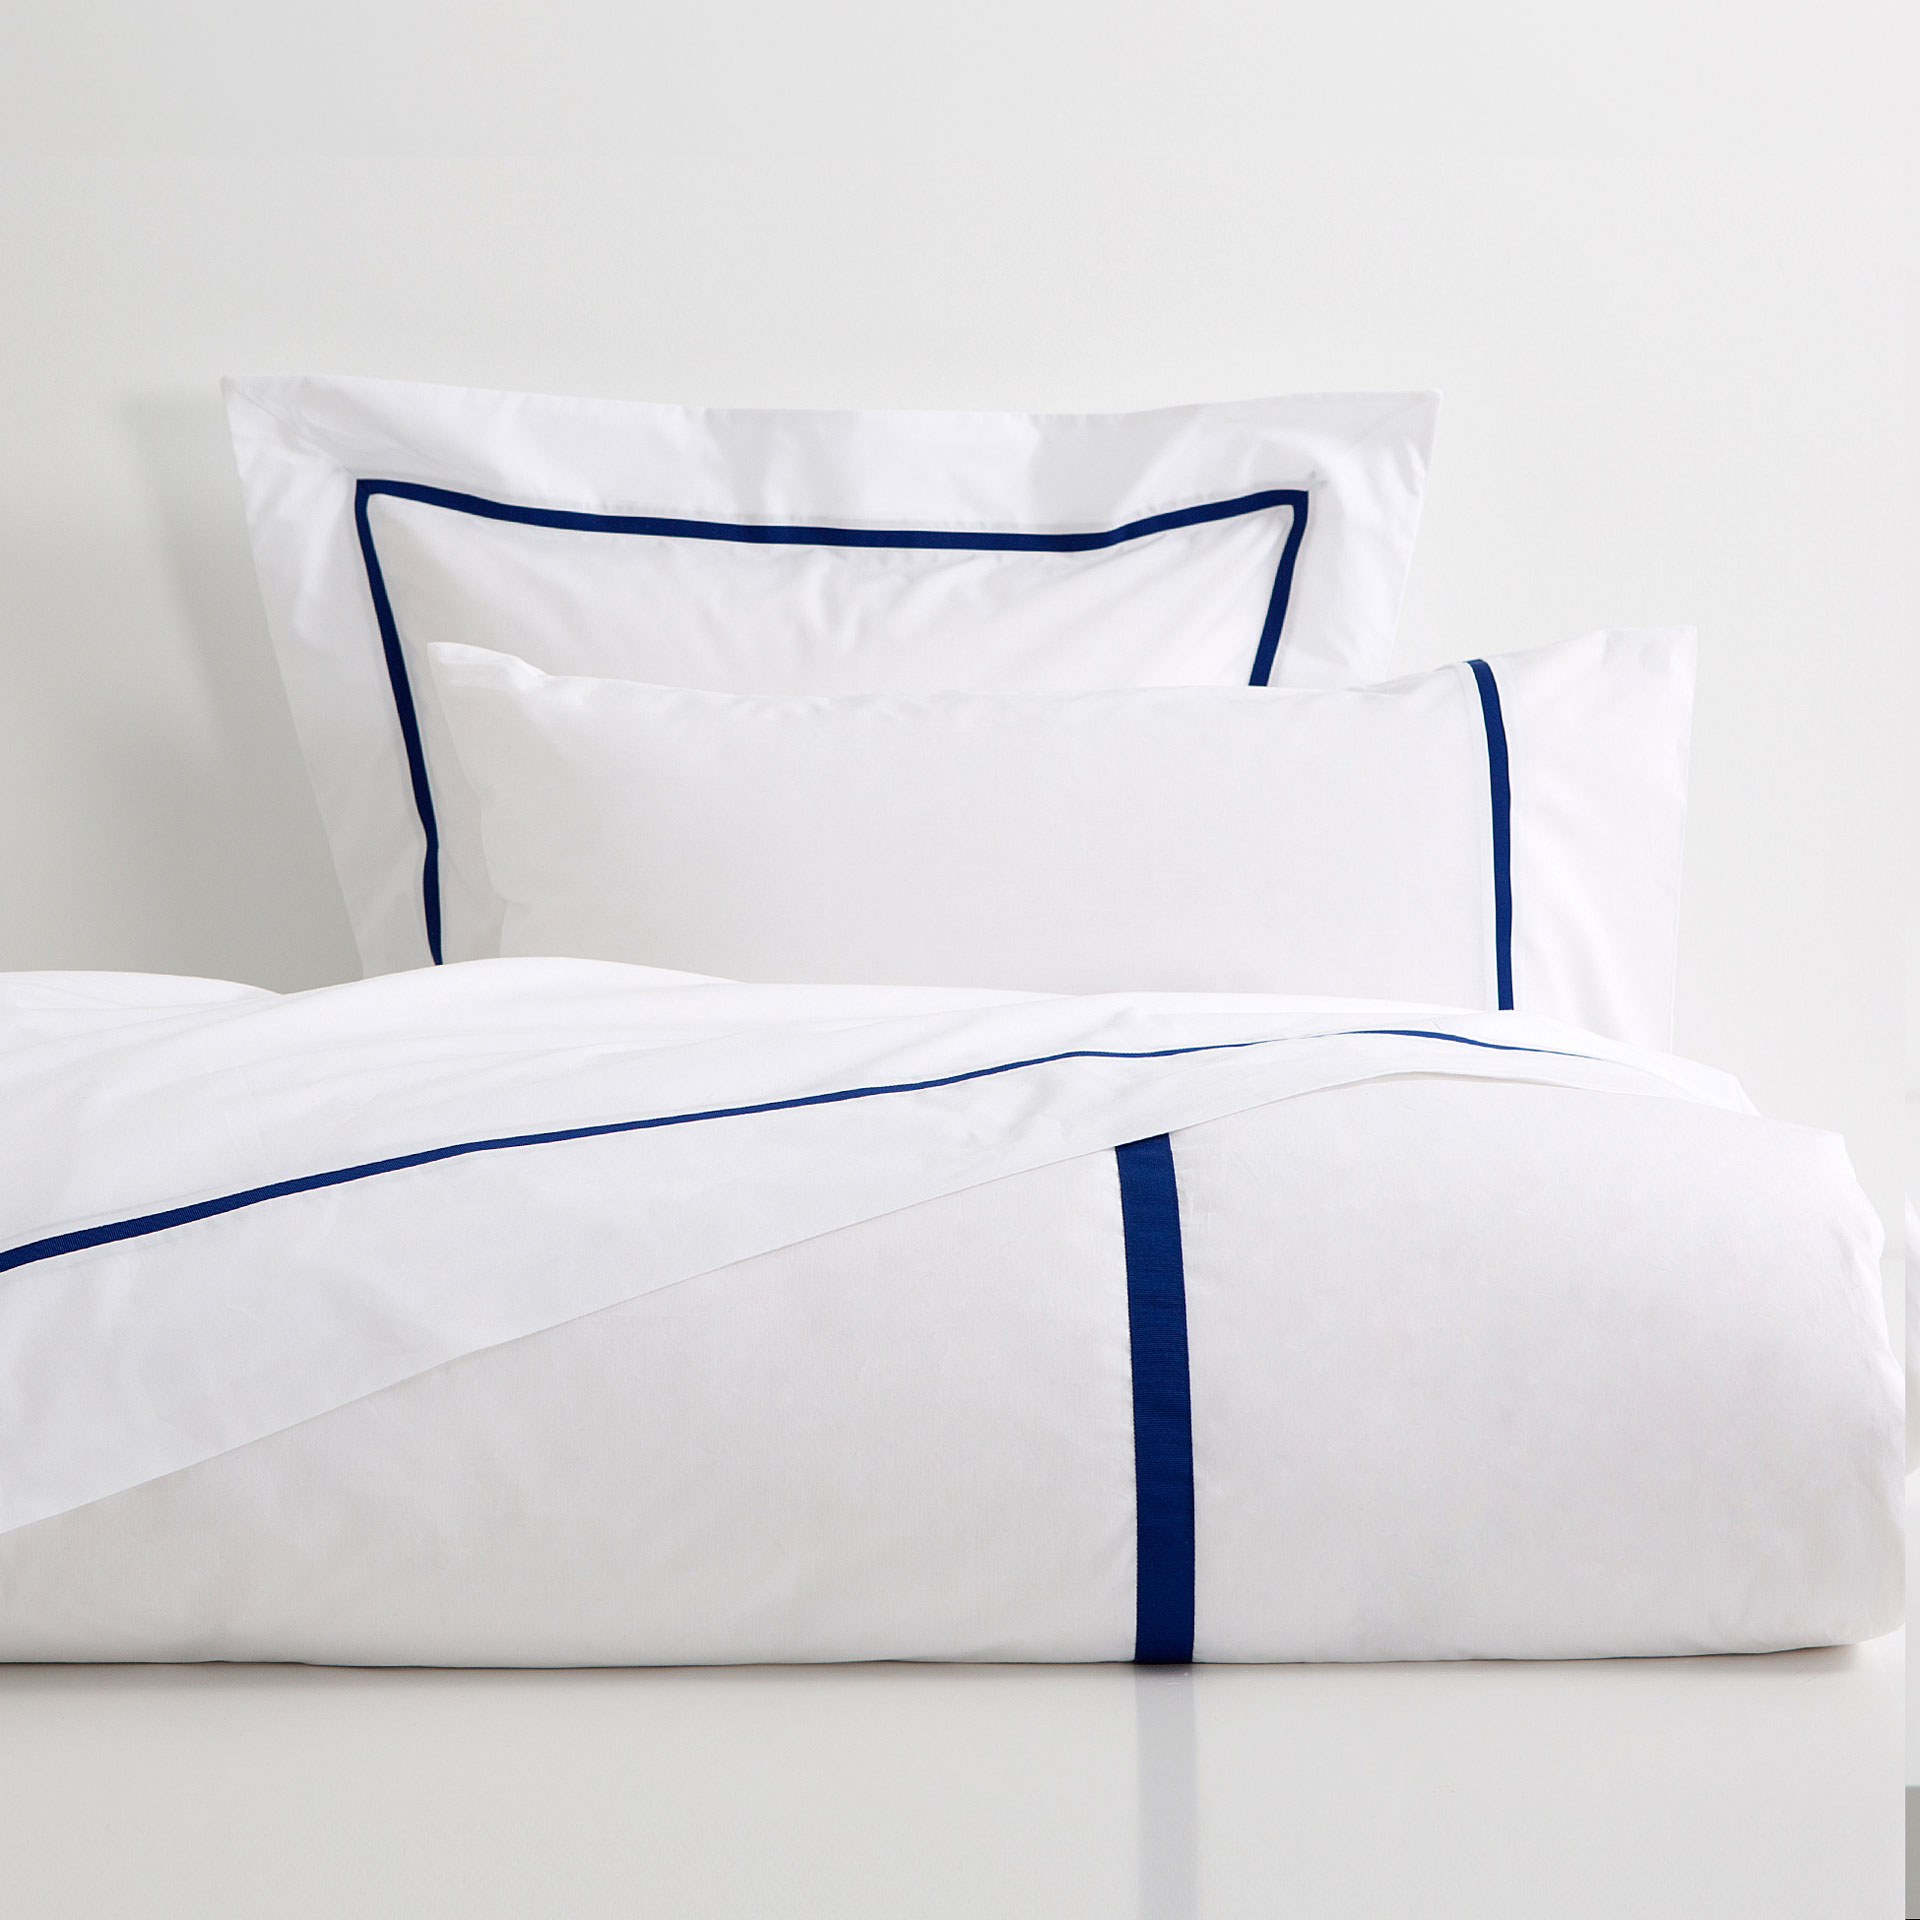 Blue and white bedding from Zara Home